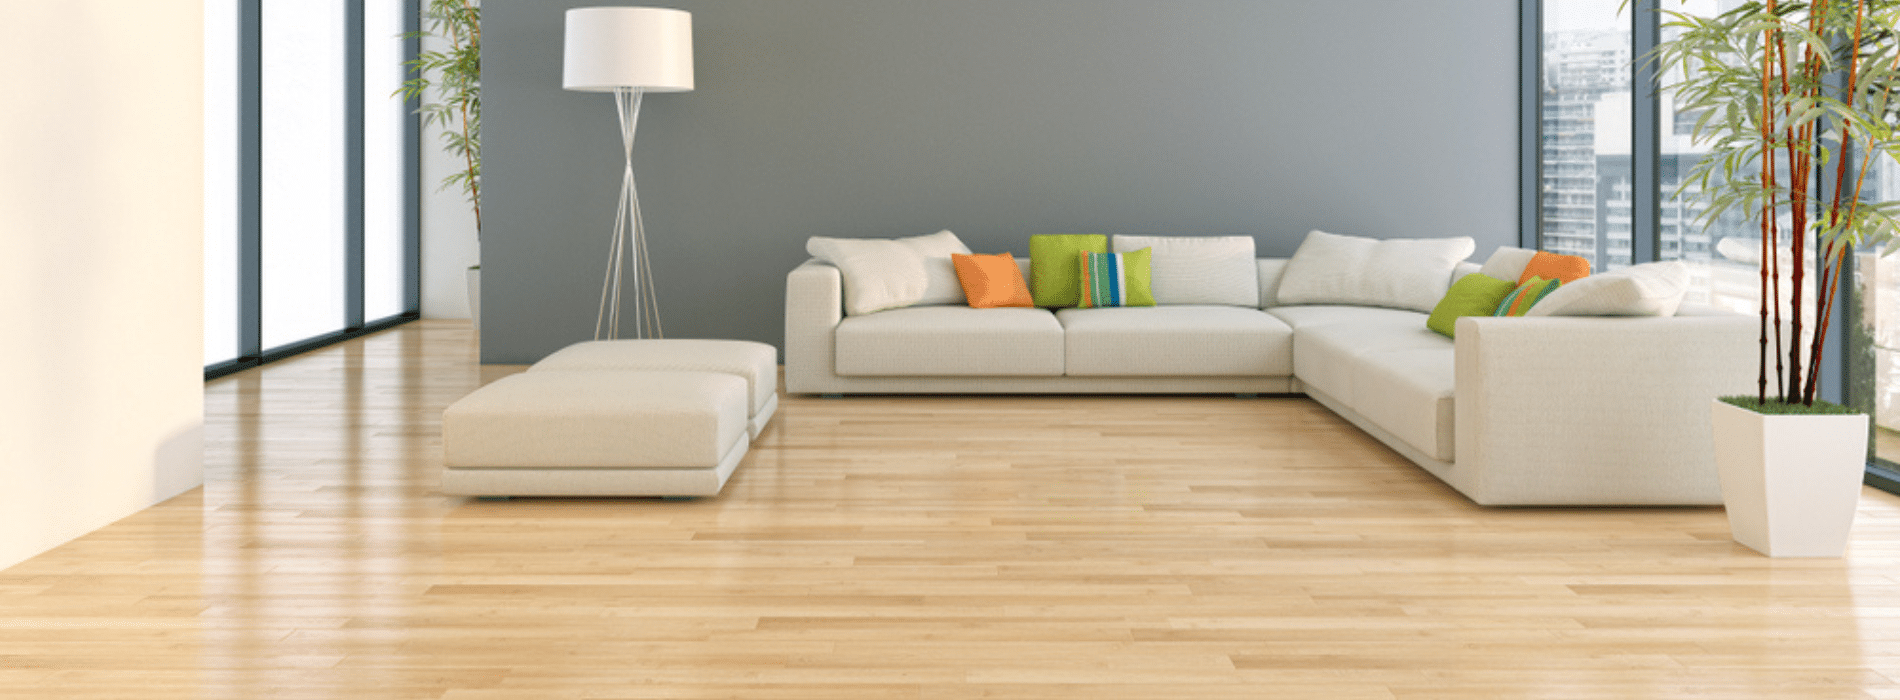 Expertly restored hardwood floor in West Wickham, BR4 by Mr Sander®. Bona 2K Frost whitewashing and Traffic HD 15% sheen matte lacquer for a durable and stunning finish. Experience long-lasting beauty with this expertly crafted floor.